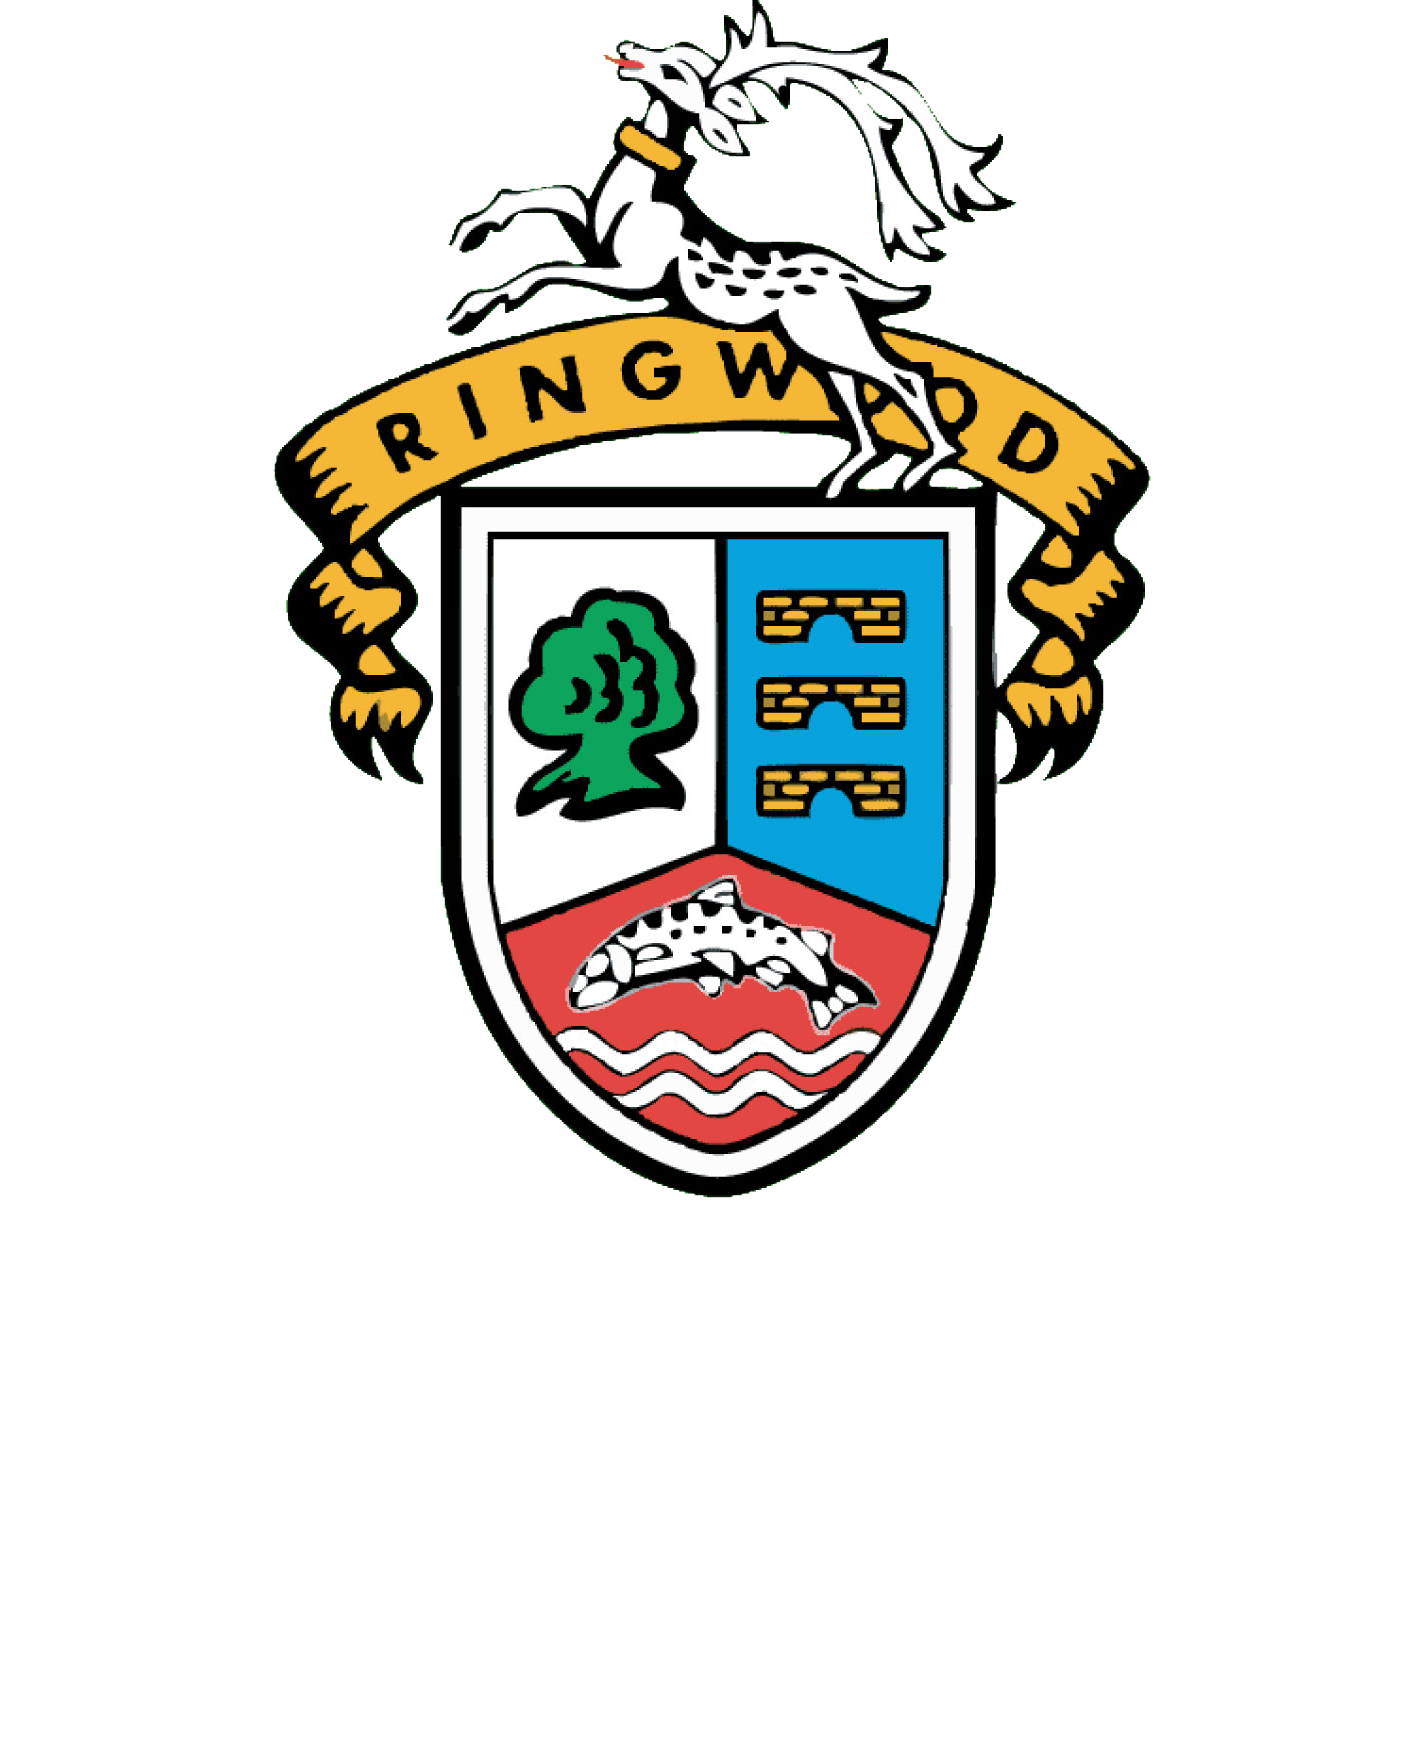 Ringwood Town Council